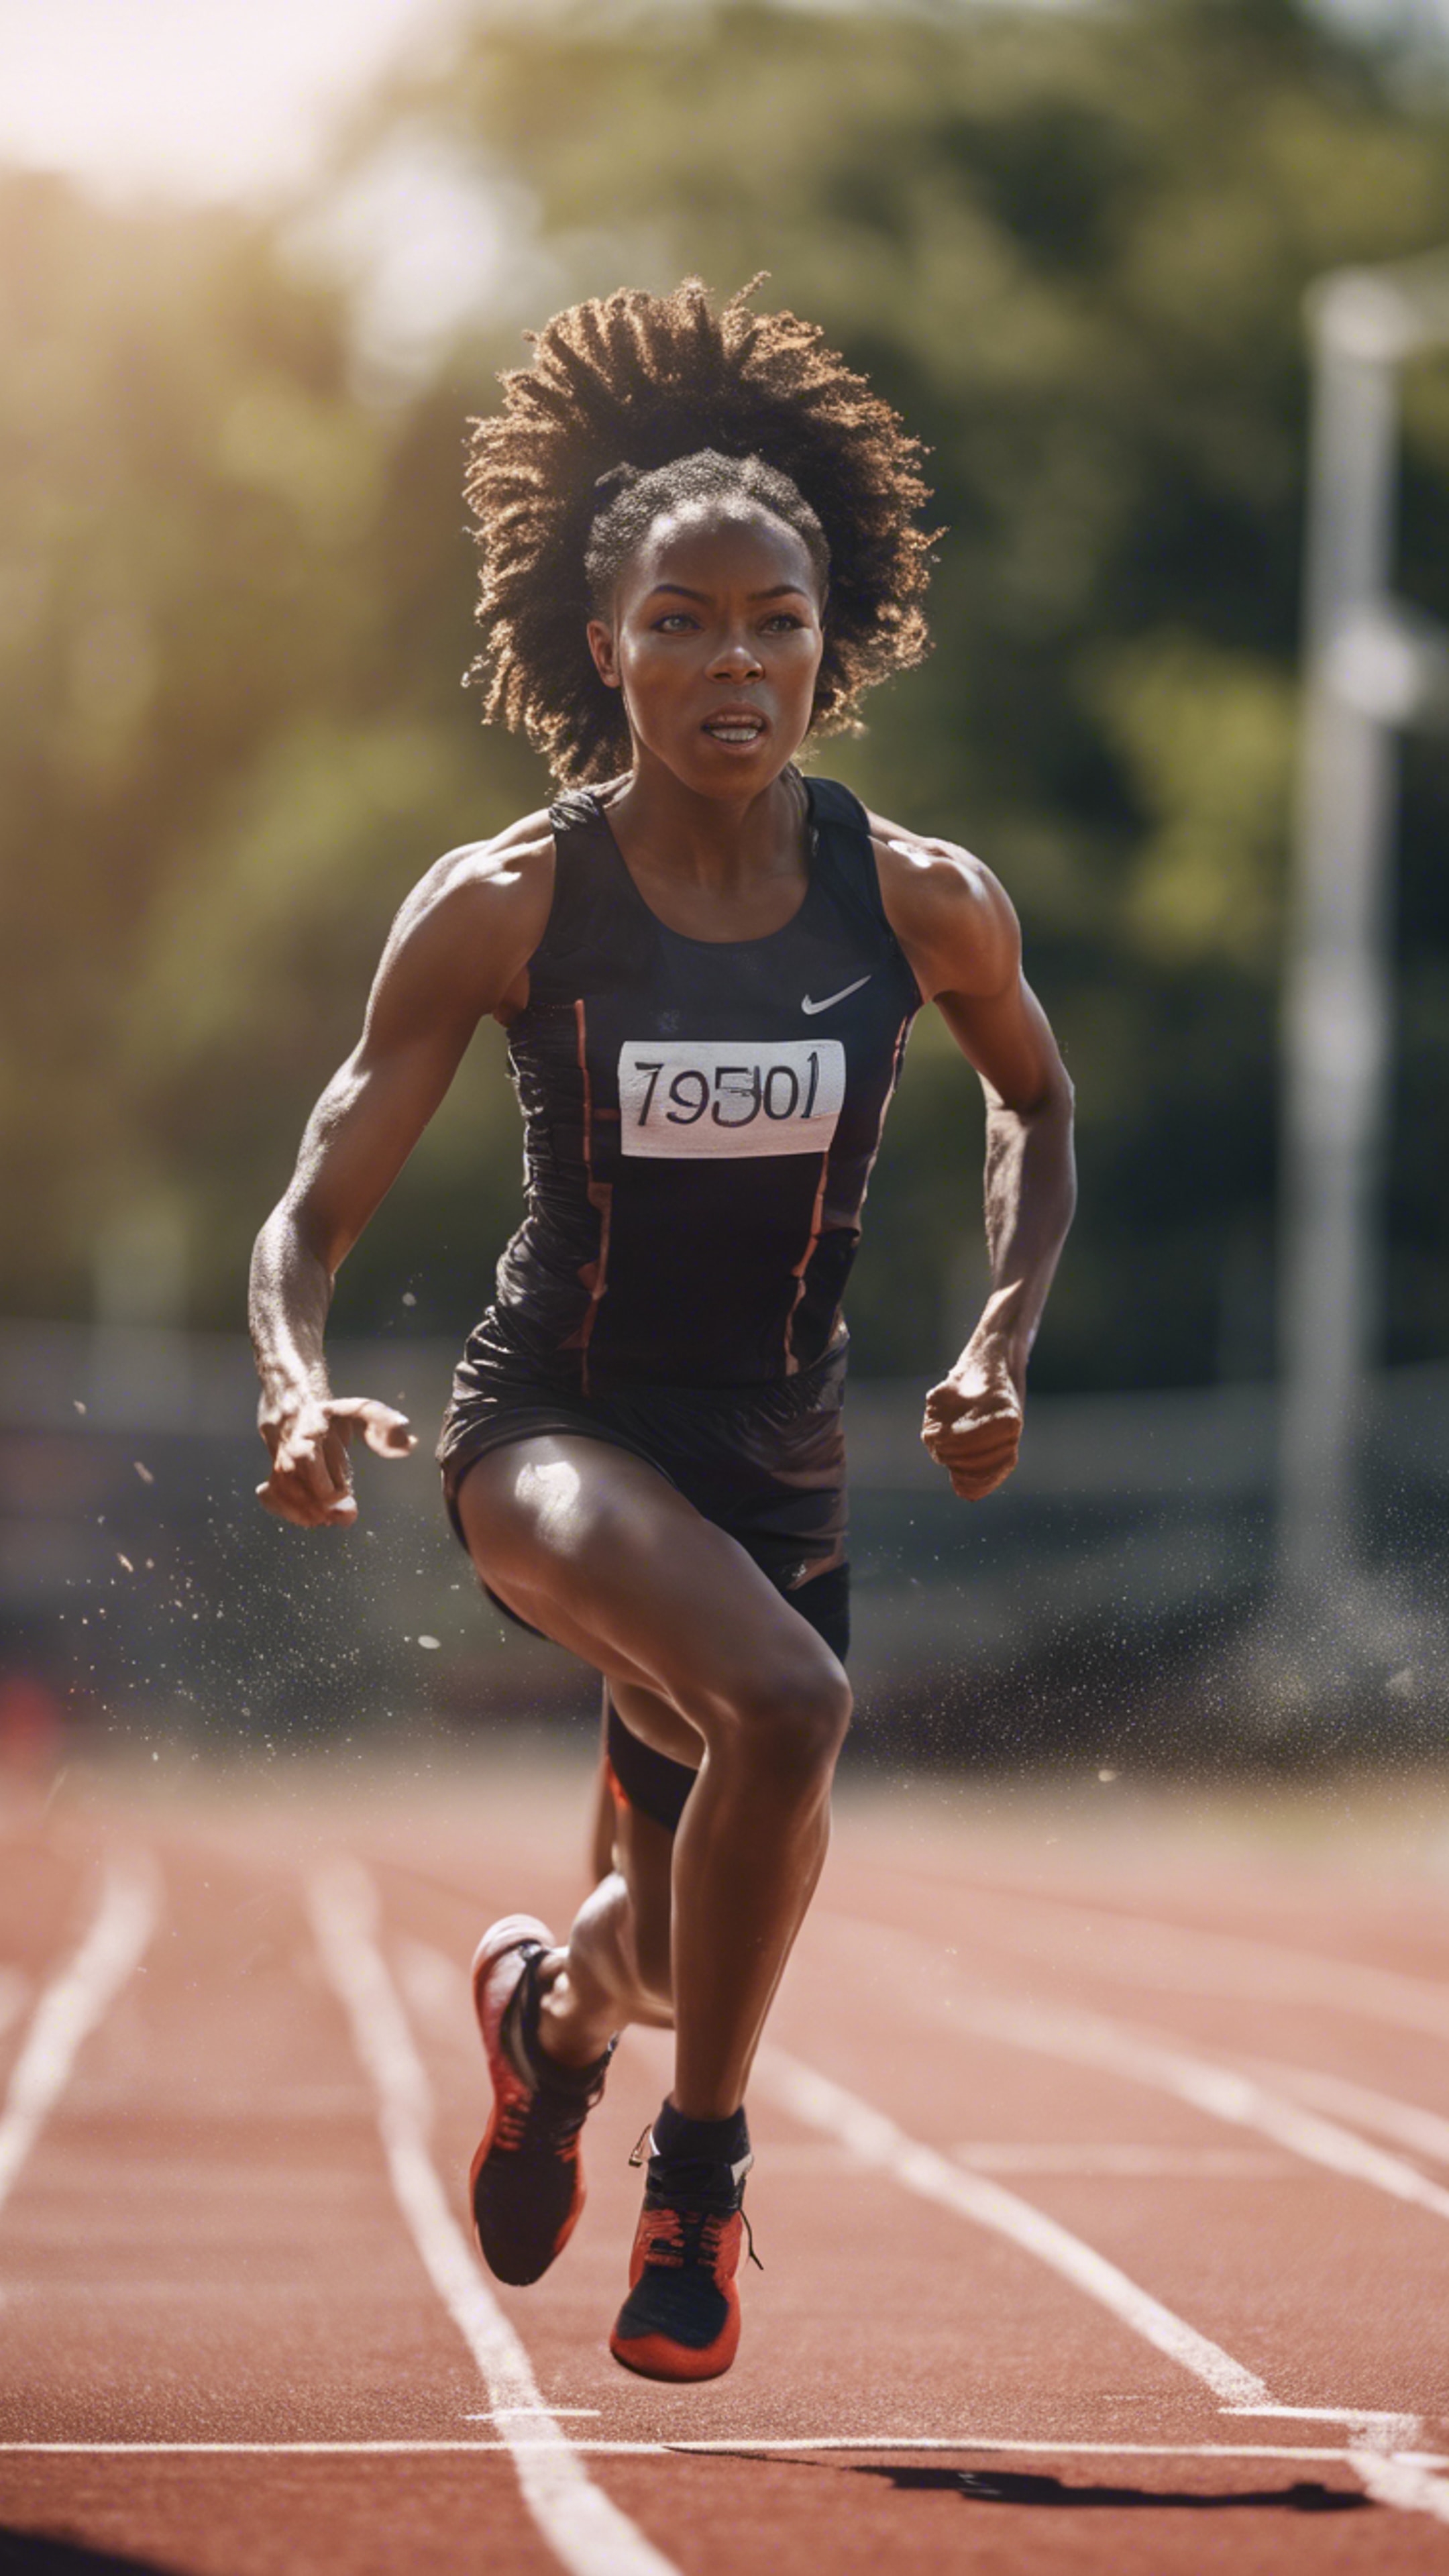 A dynamic image of a black girl engaging in competitive sprint, showing her vital energy. Wallpaper[76eb5b44f4a84b498fc2]